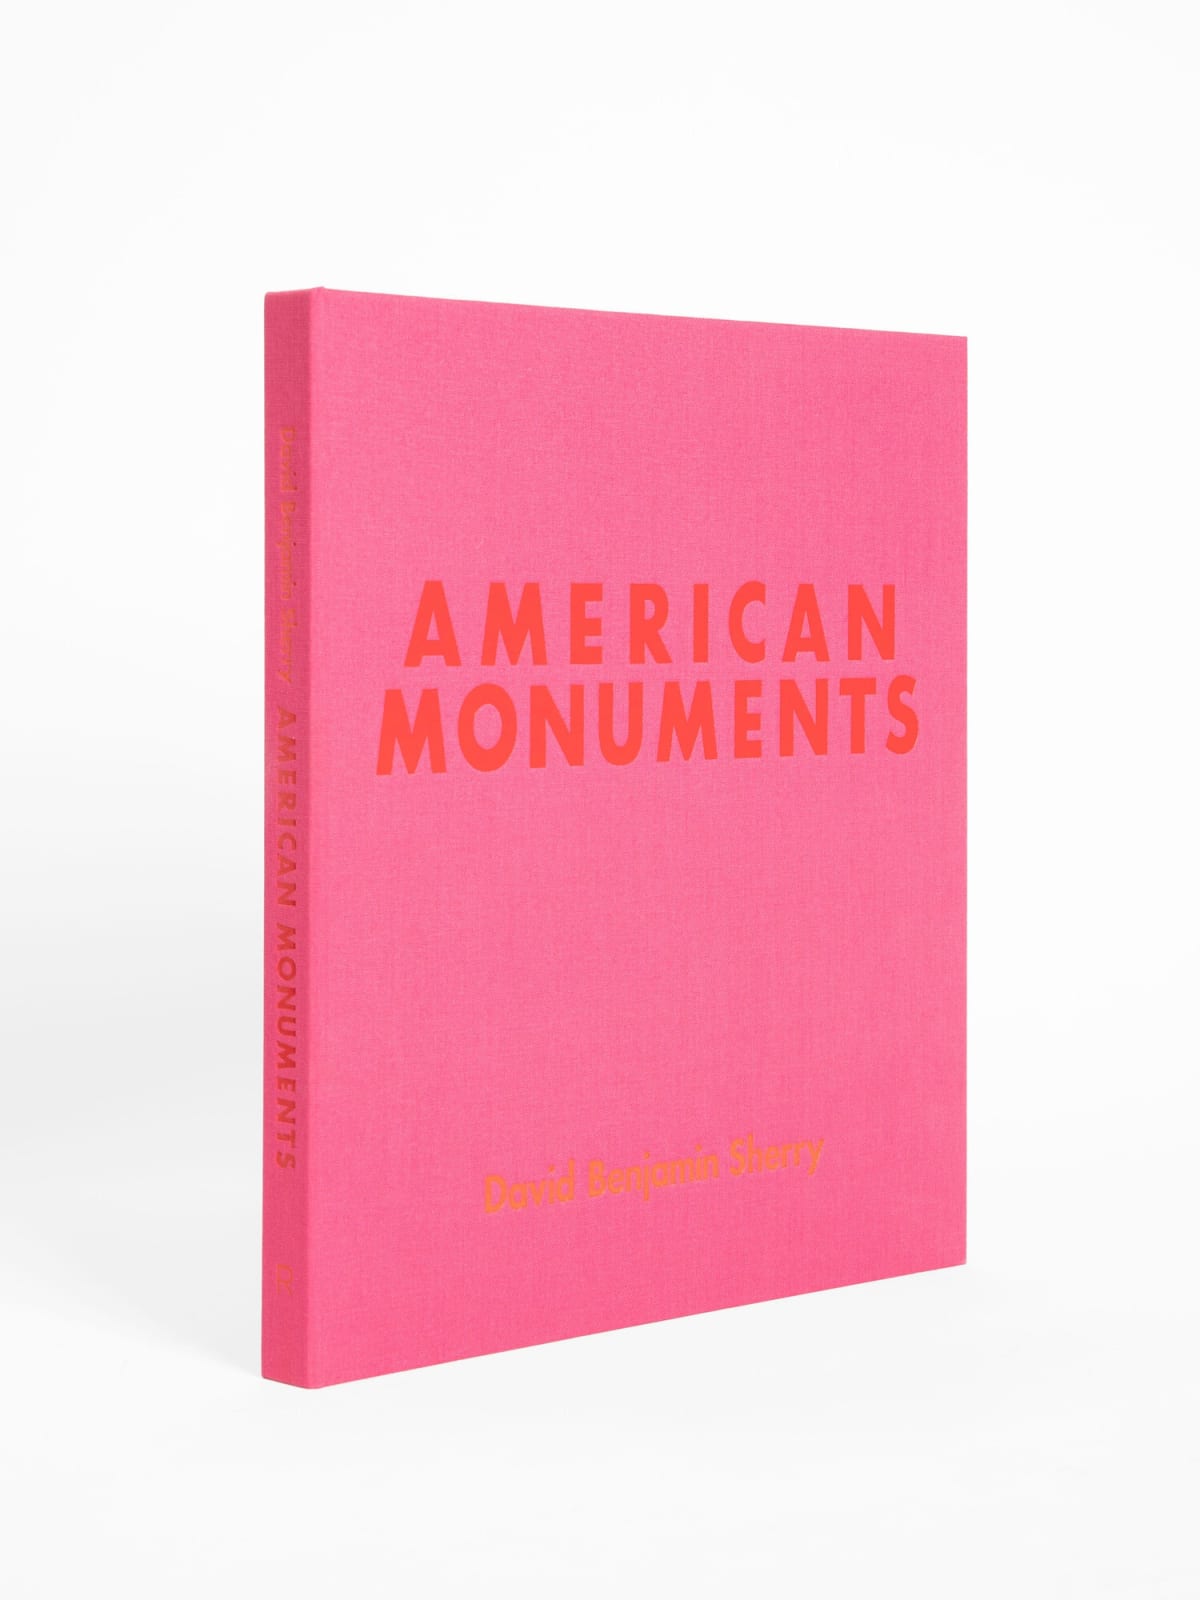 AMERICAN MONUMENTS